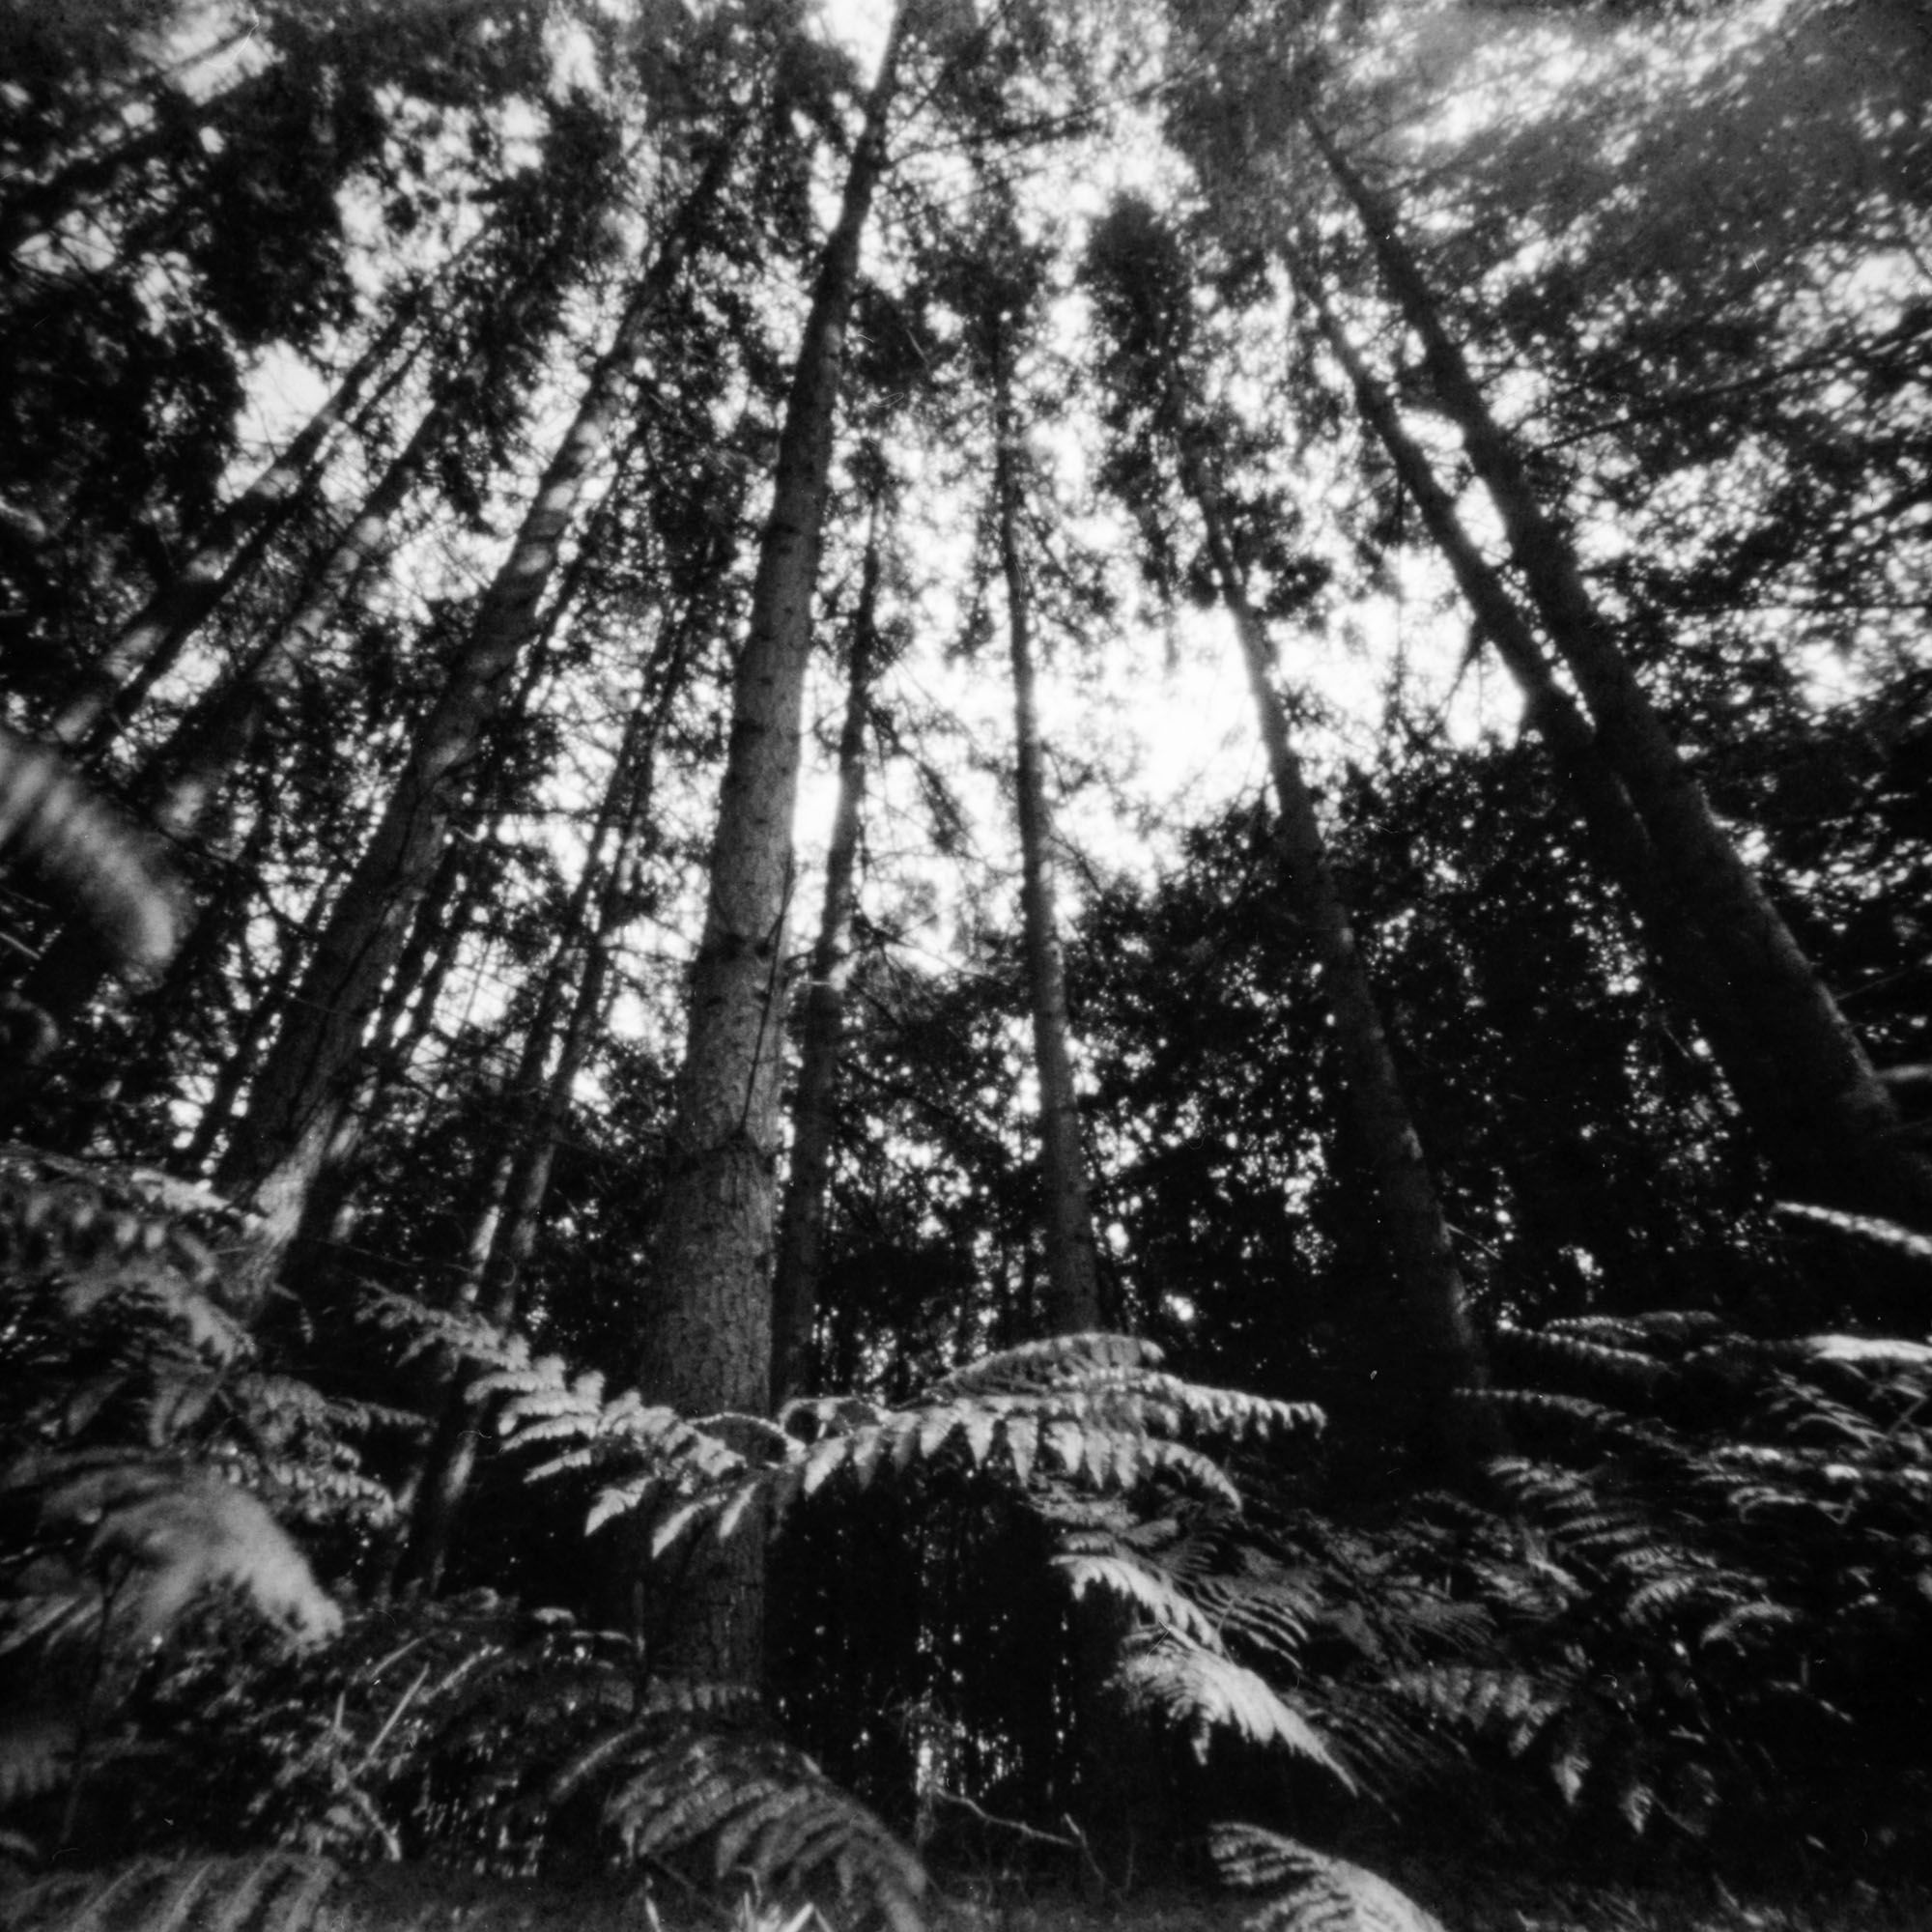 B/W picture surrounded by trees